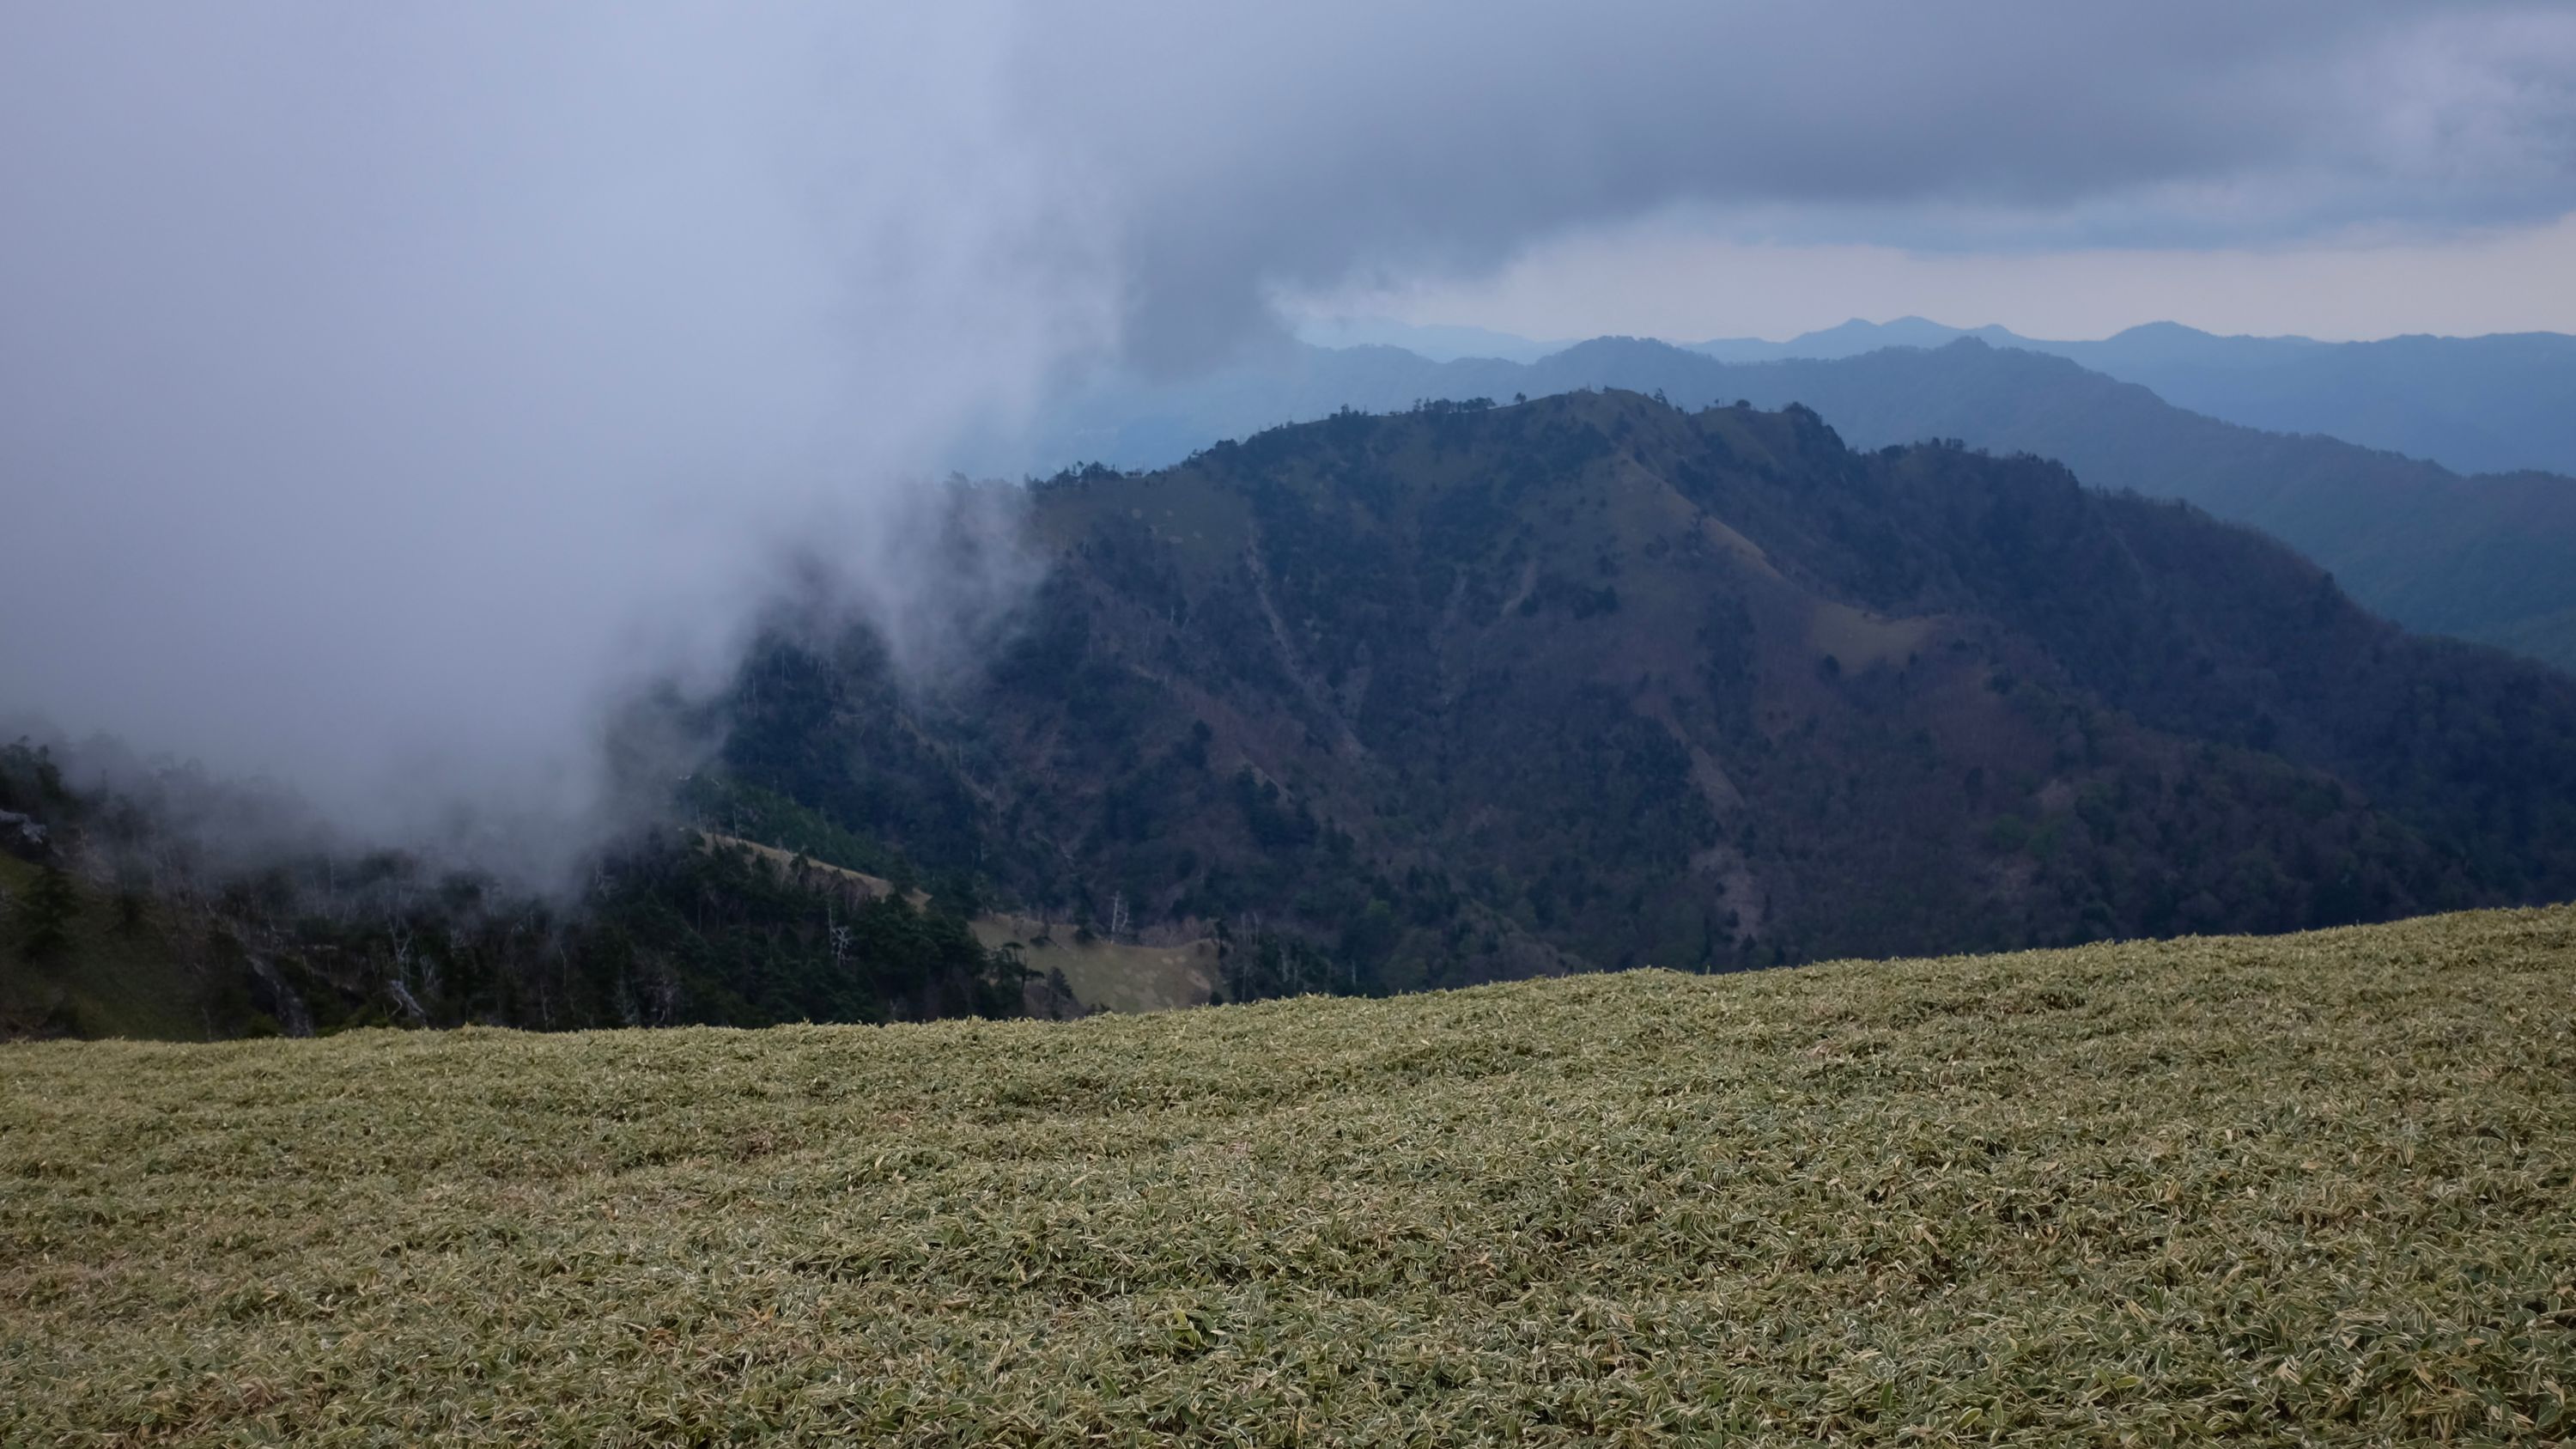 The grassy summit of Mount Tsurugi under clouds so low they almost touch the ground.